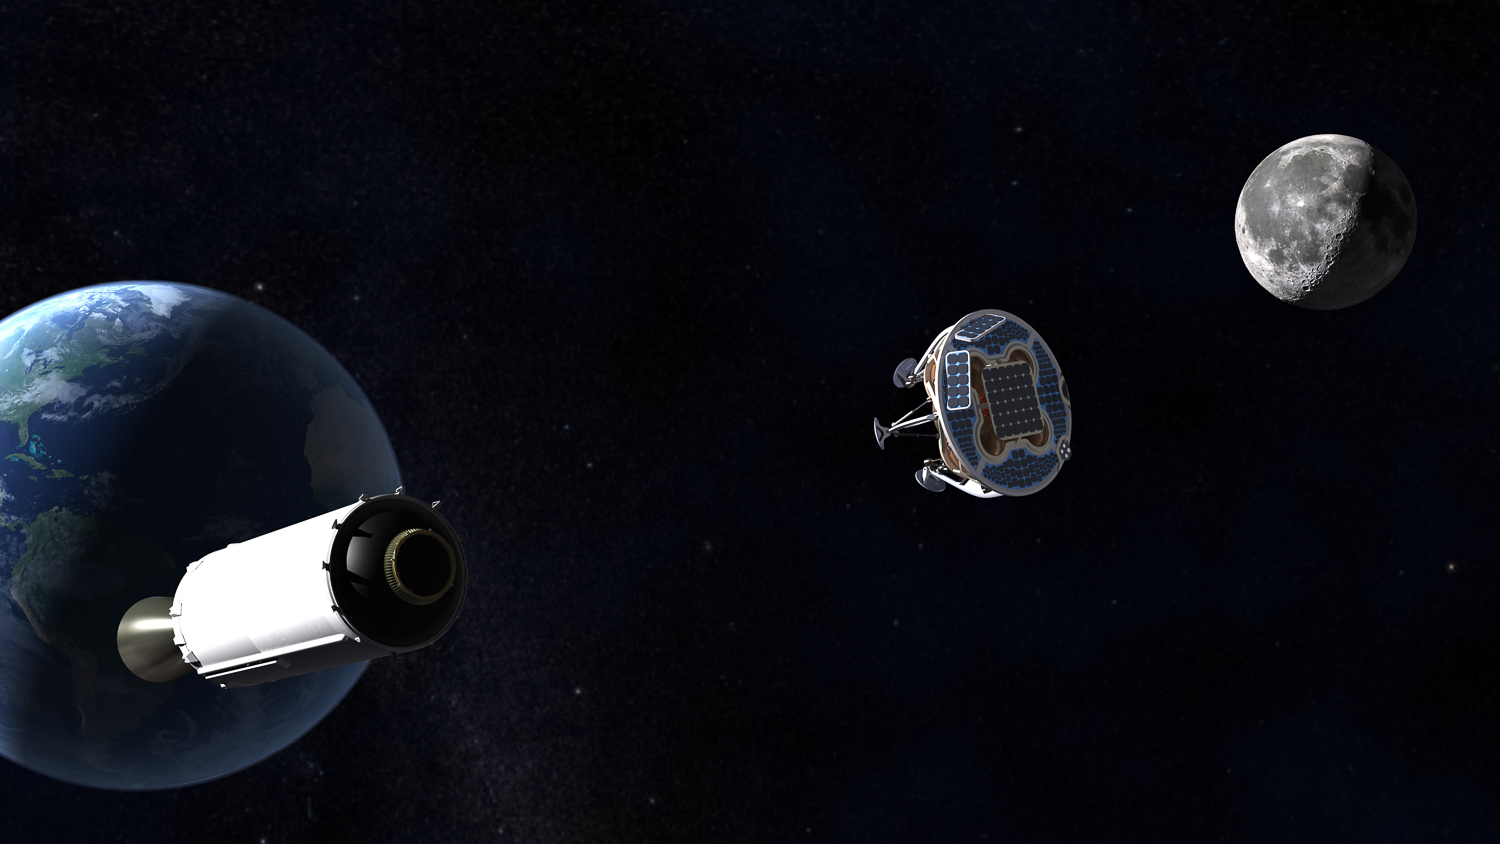 Artist's concept of the SpaceIL spacecraft on its way to the moon. Image Credit: SpaceIL